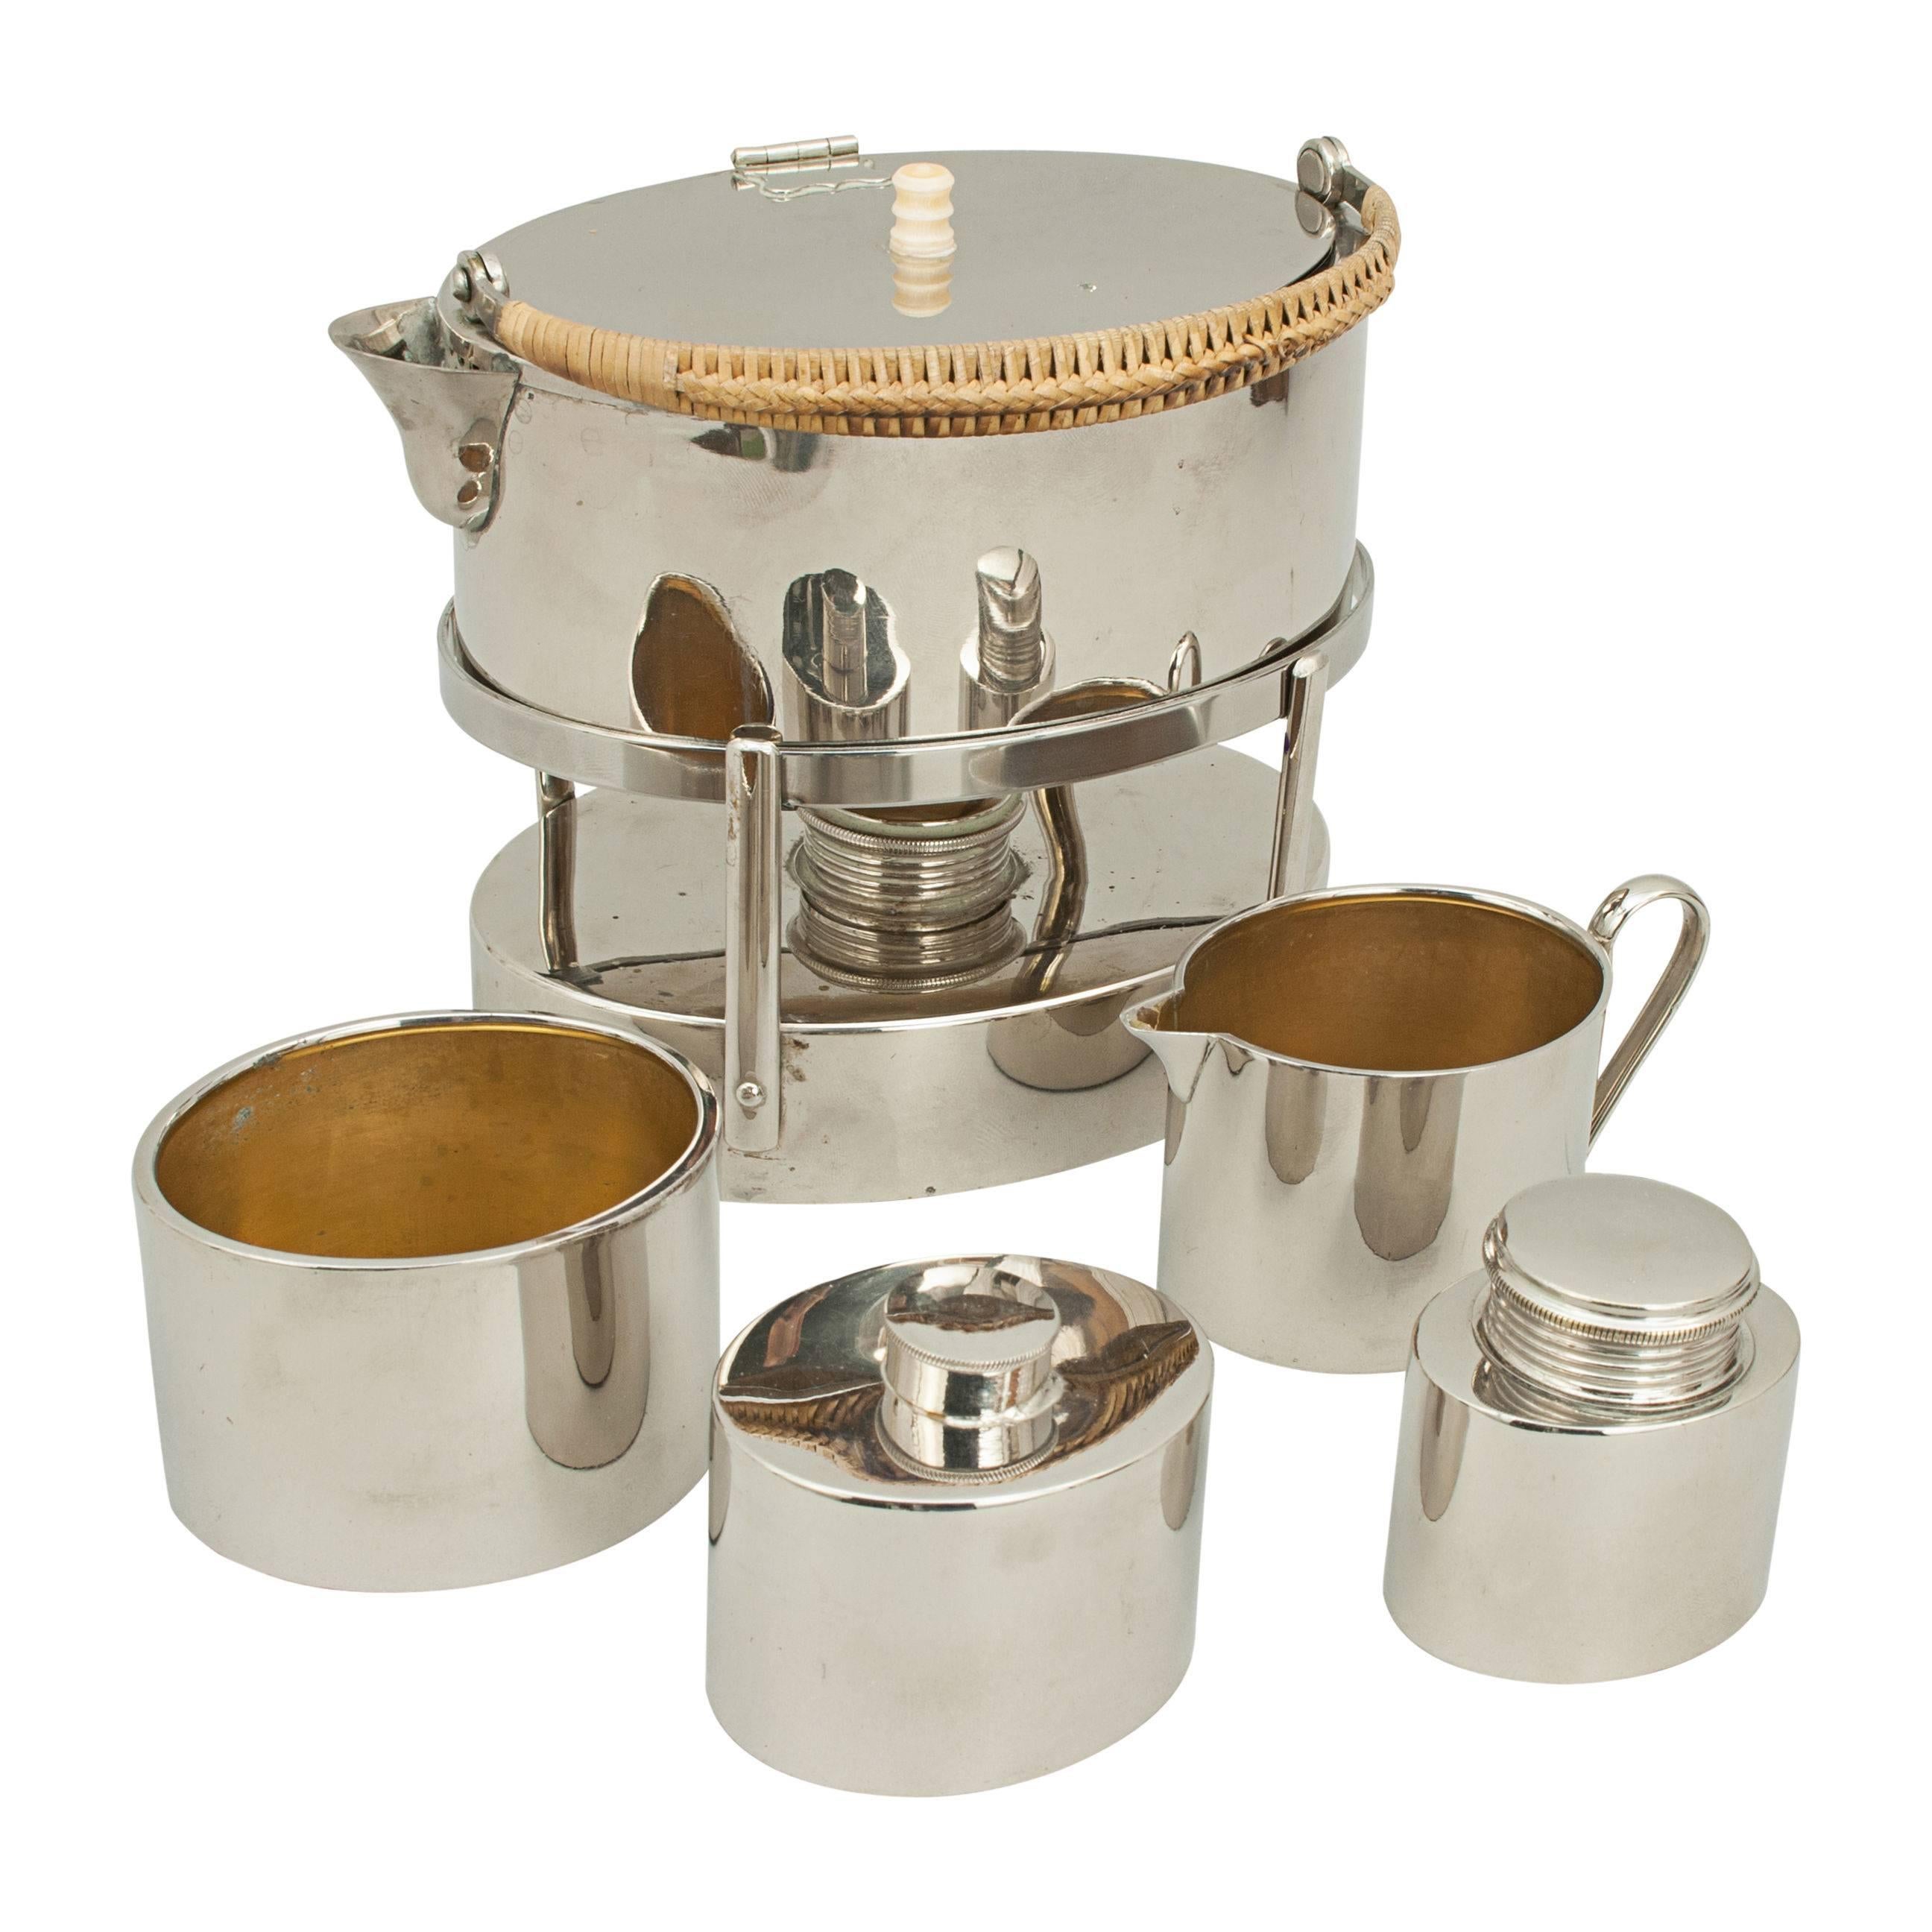 Campaign picnic set, tea maker. 
A late Victorian chrome-plated metal traveller's tea set in original leather case. The set comprising of a kettle that doubles as a tea pot, a spirit burner, jug, an oval bowl and two containers with screw lids.